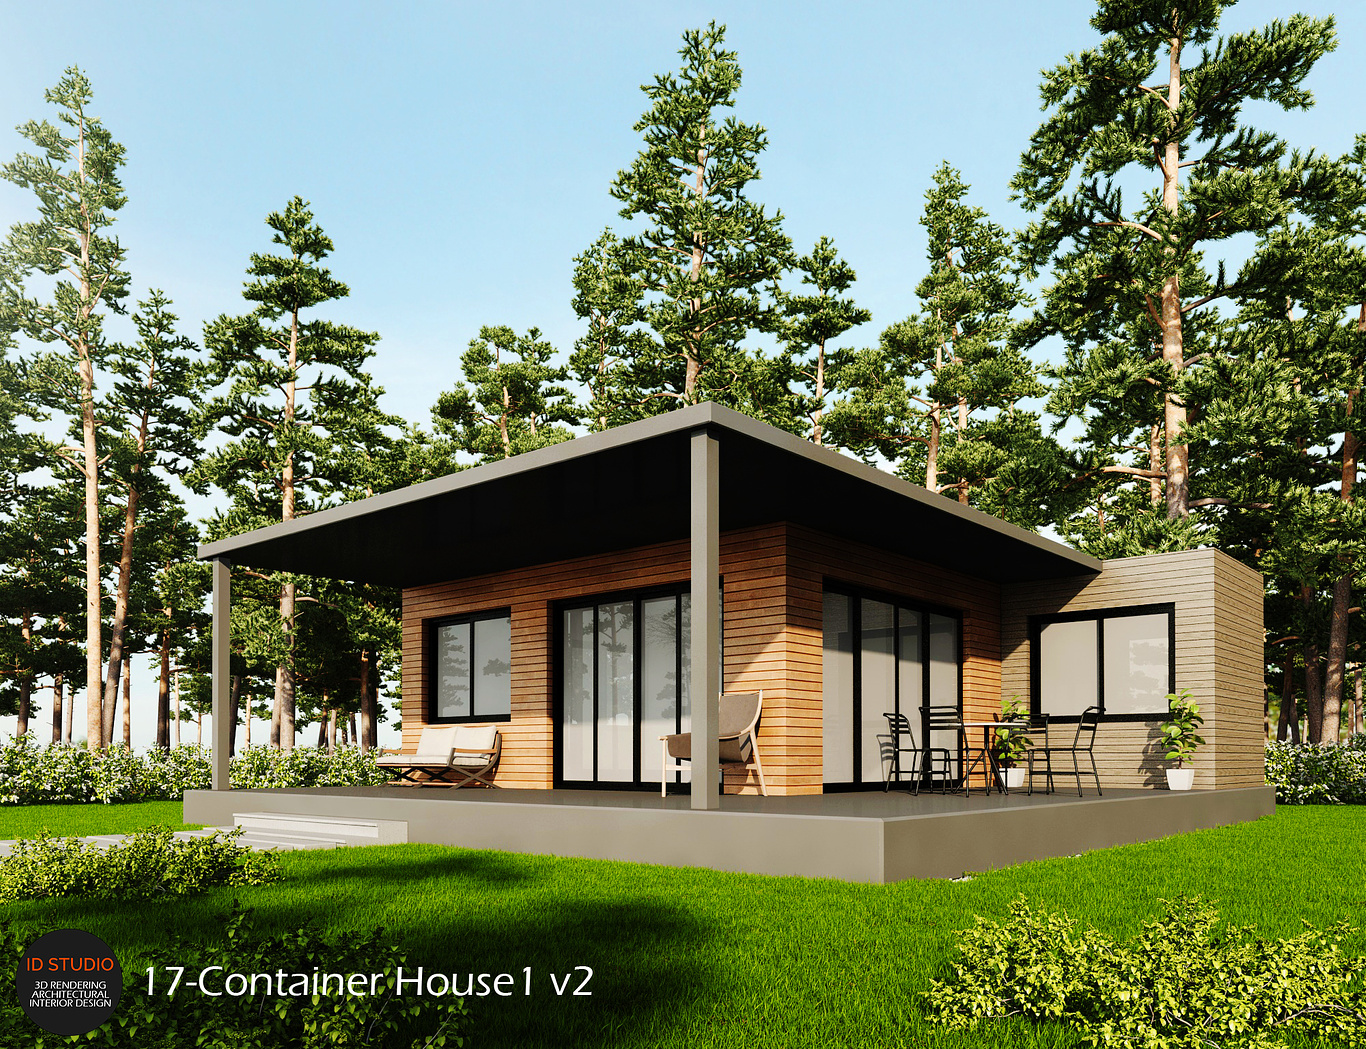 17-Container Houses Project | 2design3d Studio - CGarchitect ...